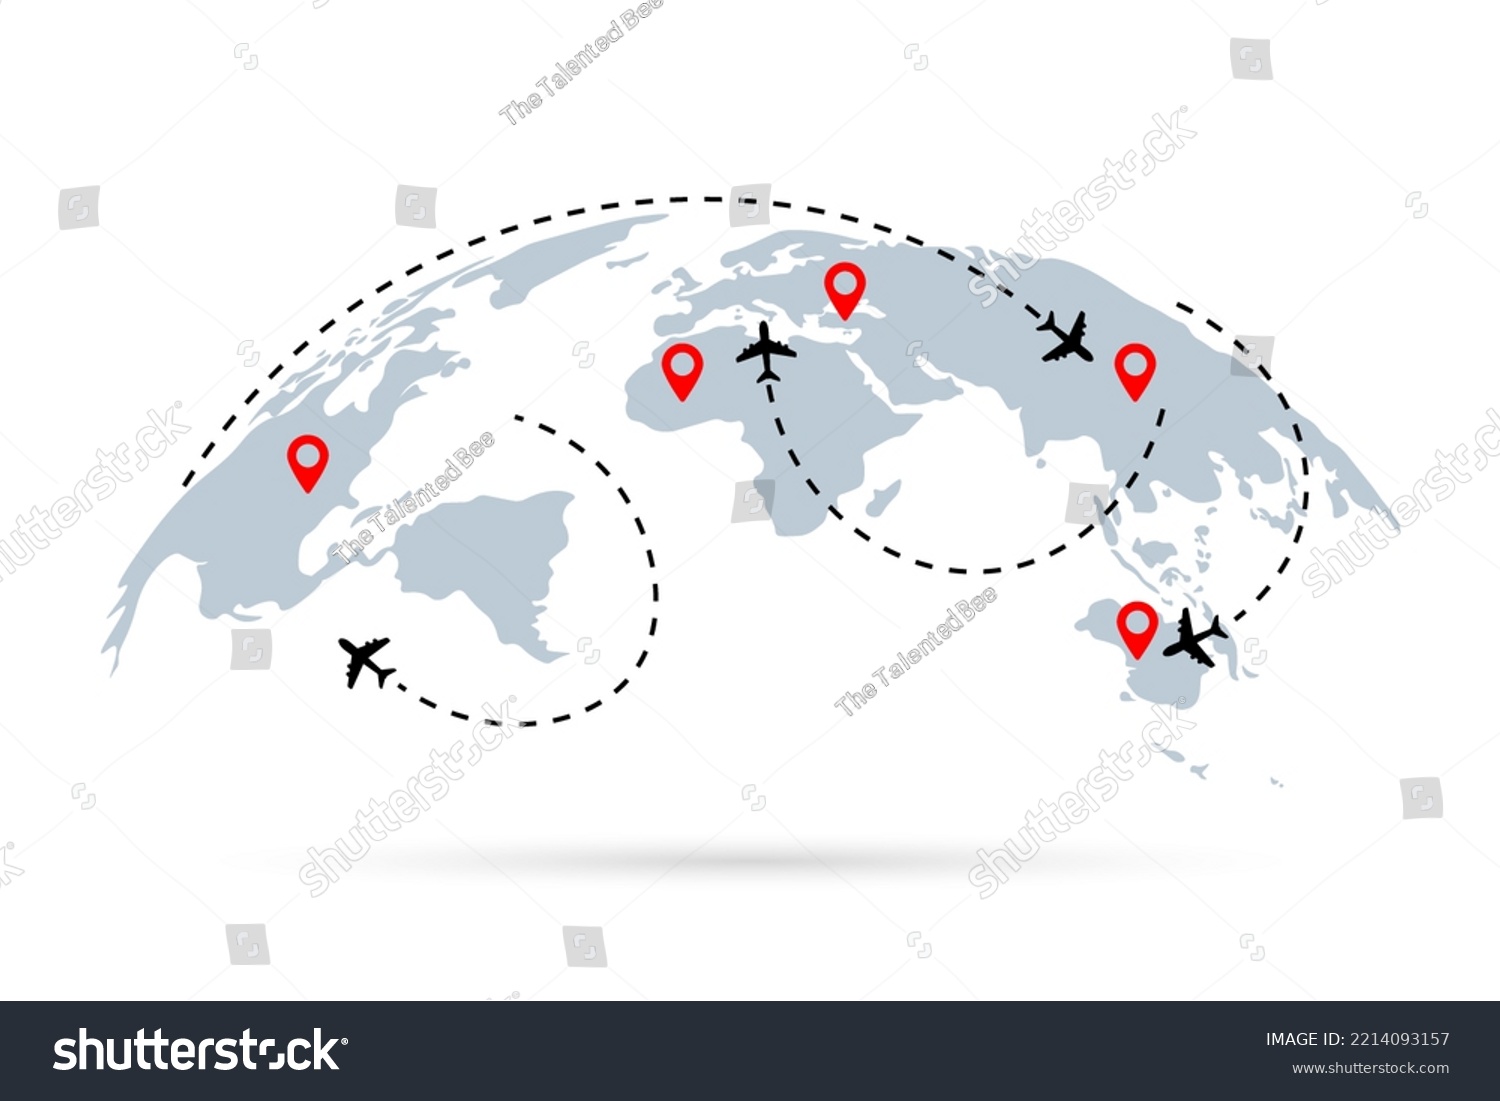 Travel, Flight Routes. Airline airplane flight path travel plans. Isolated vector illustration. #2214093157